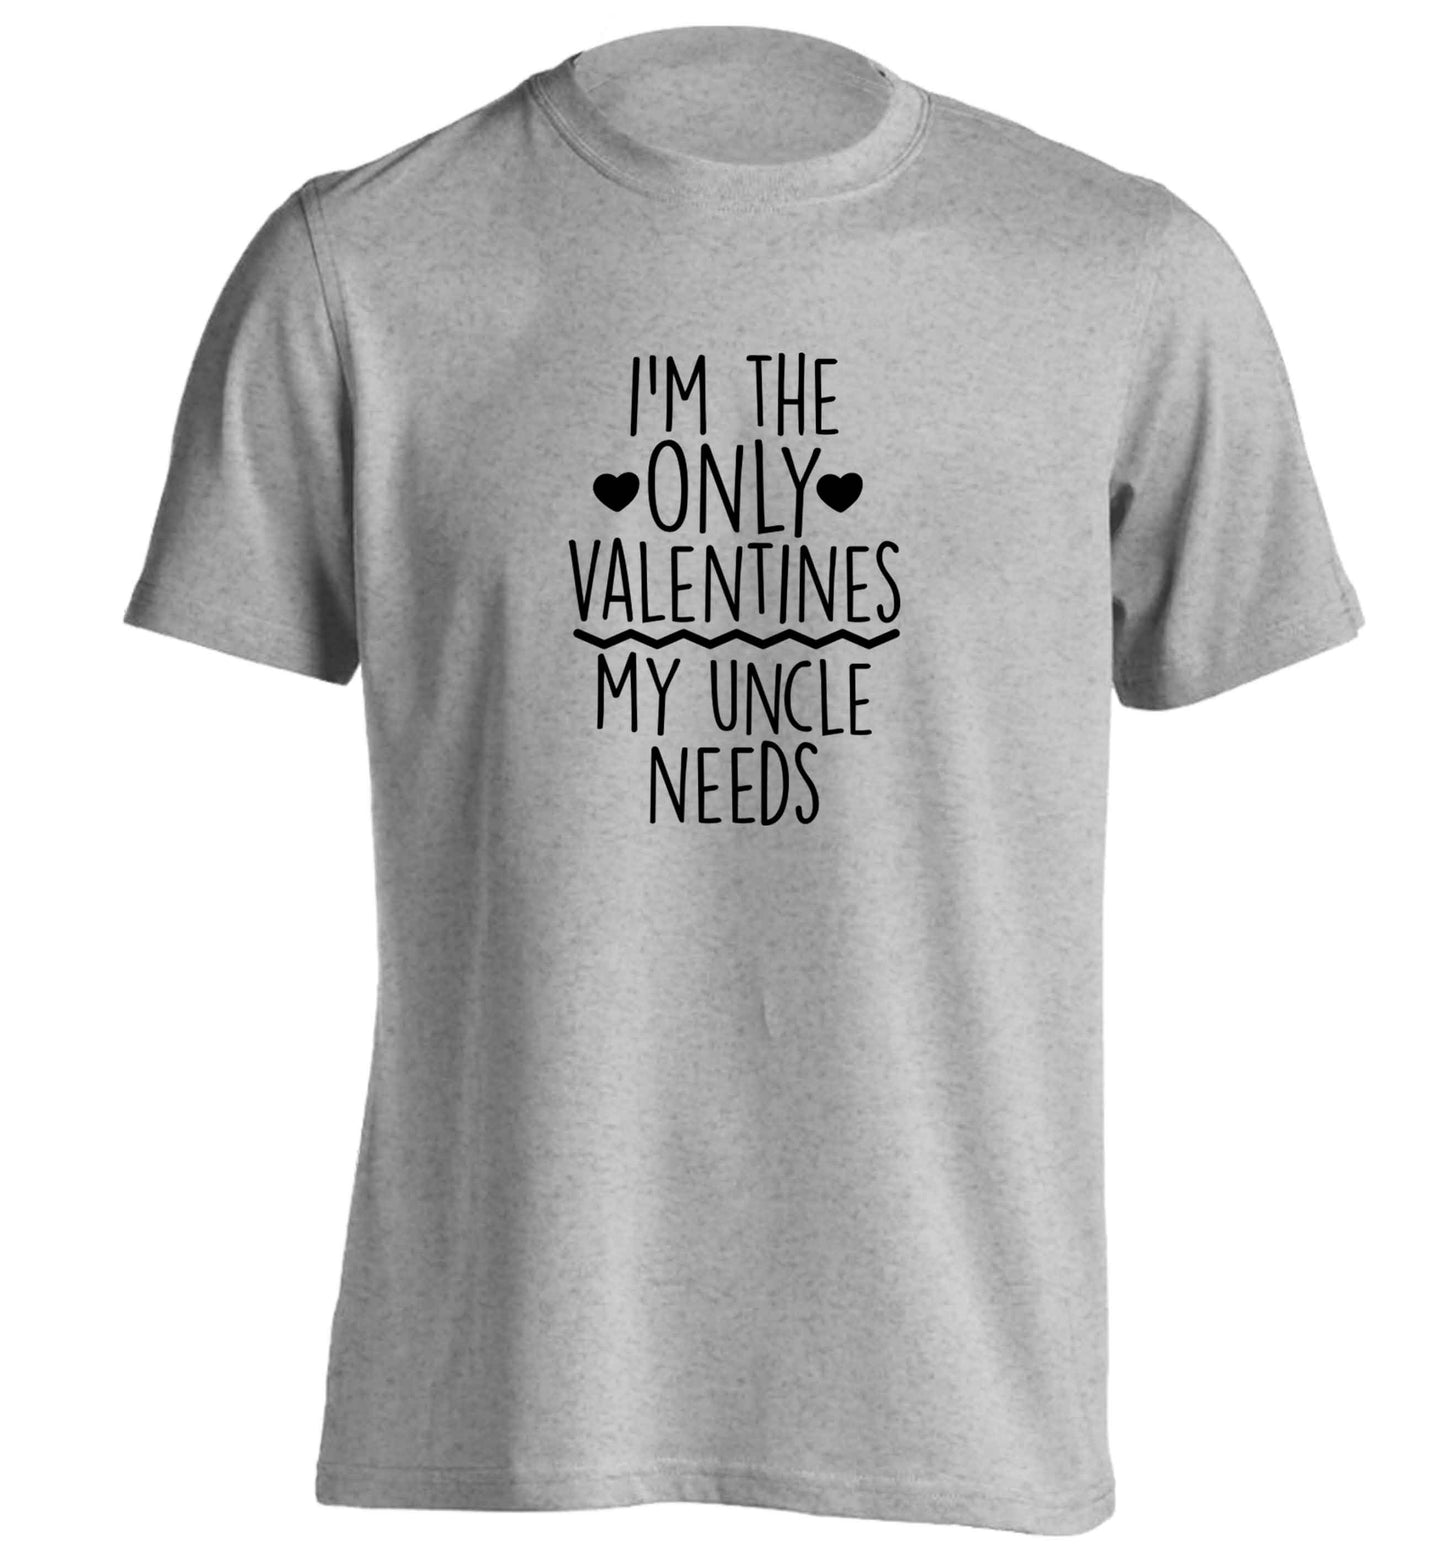 I'm the only valentines my uncle needs adults unisex grey Tshirt 2XL